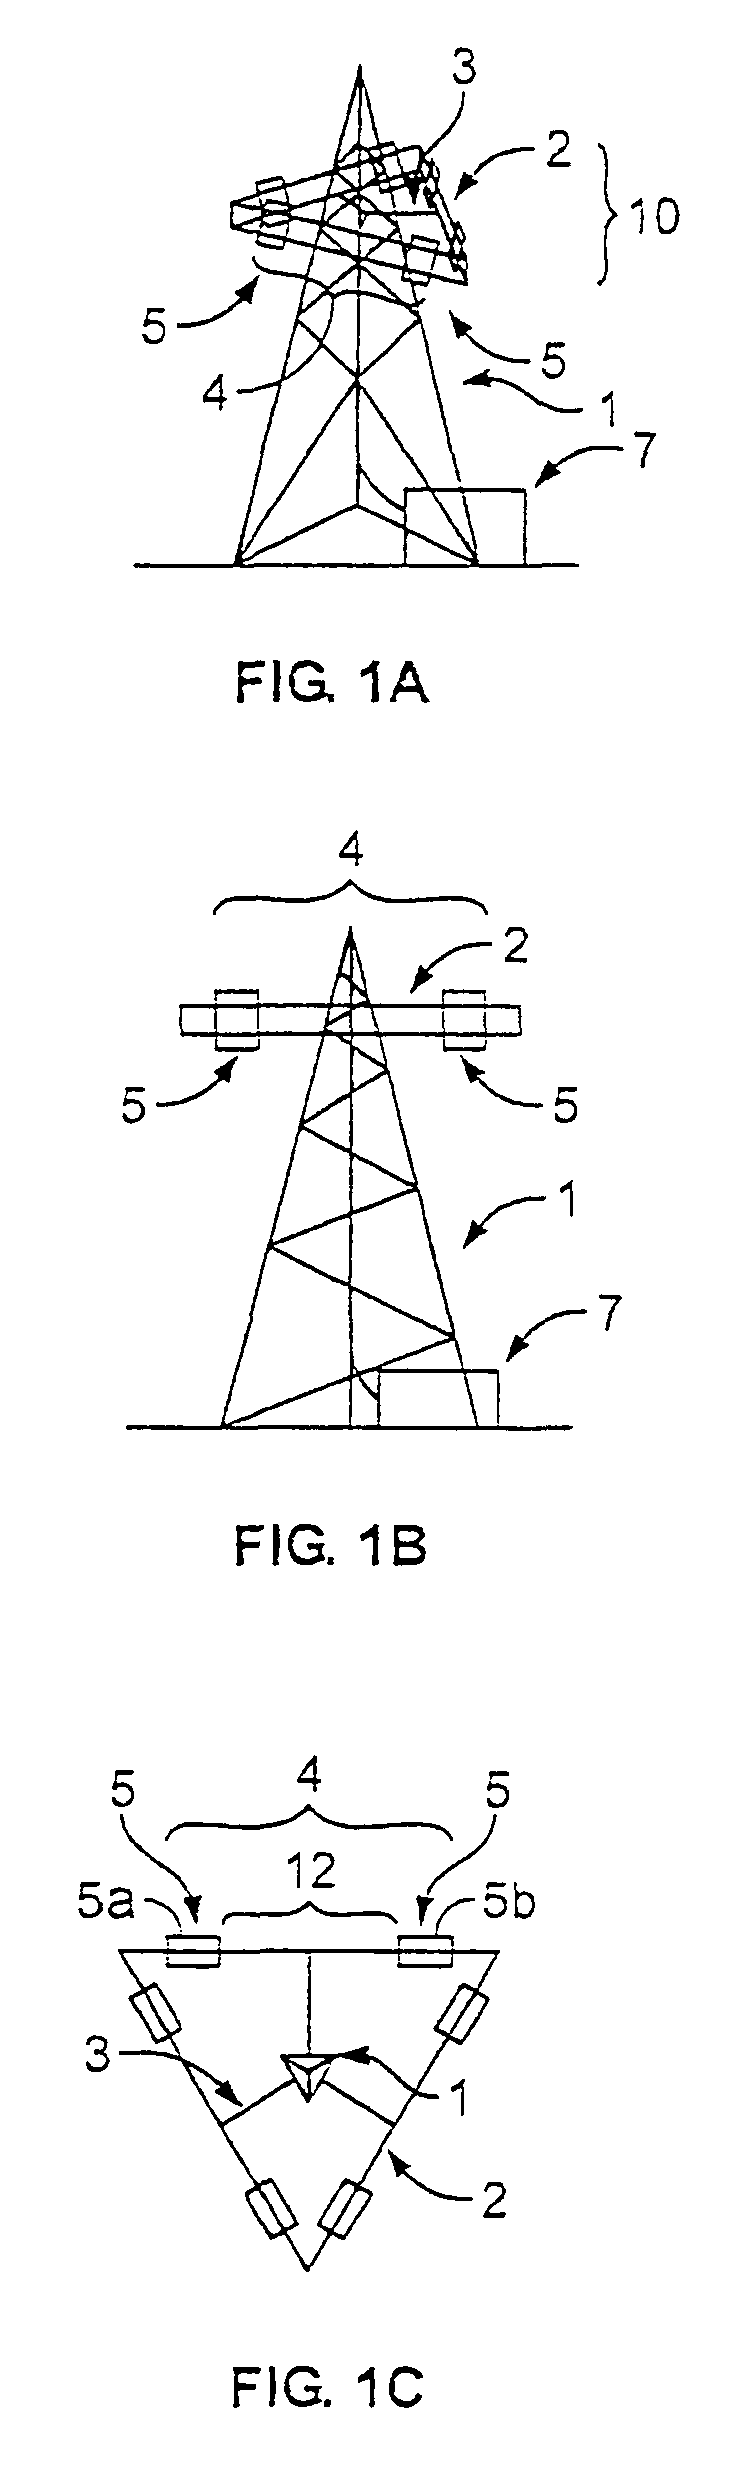 Method and apparatus for interference suppression in orthogonal frequency division multiplexed (OFDM) wireless communication systems